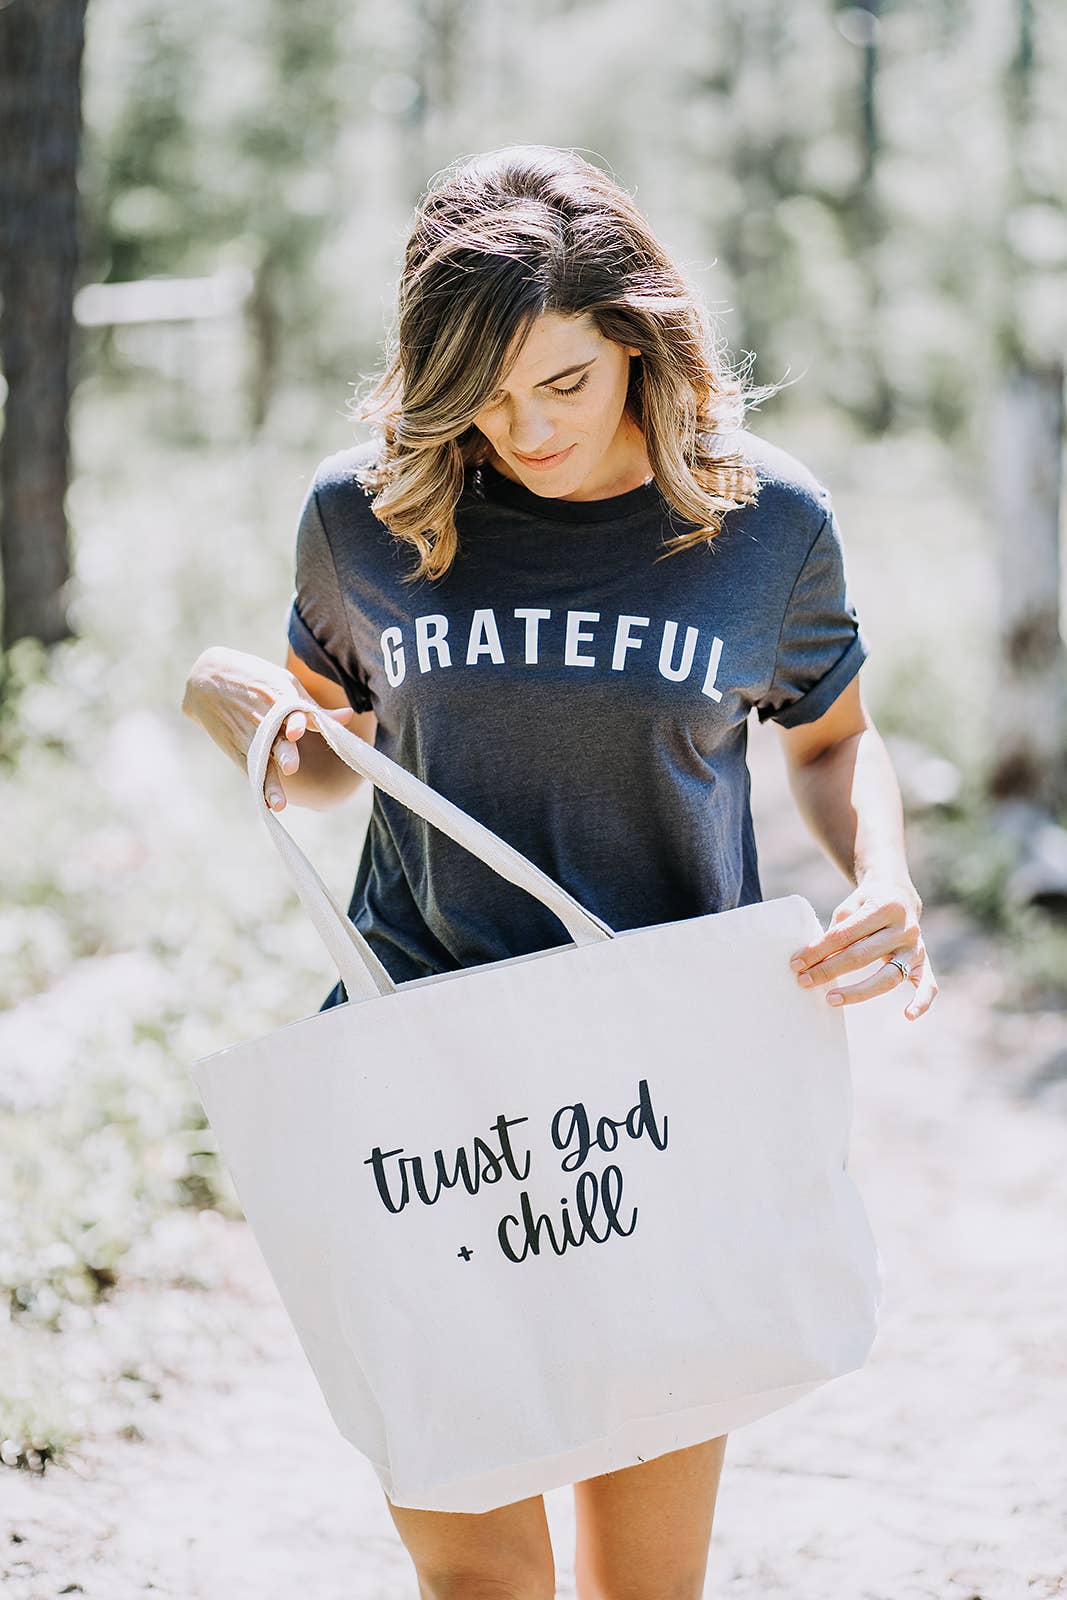 Trust God And Chill - Jumbo Reusable Tote